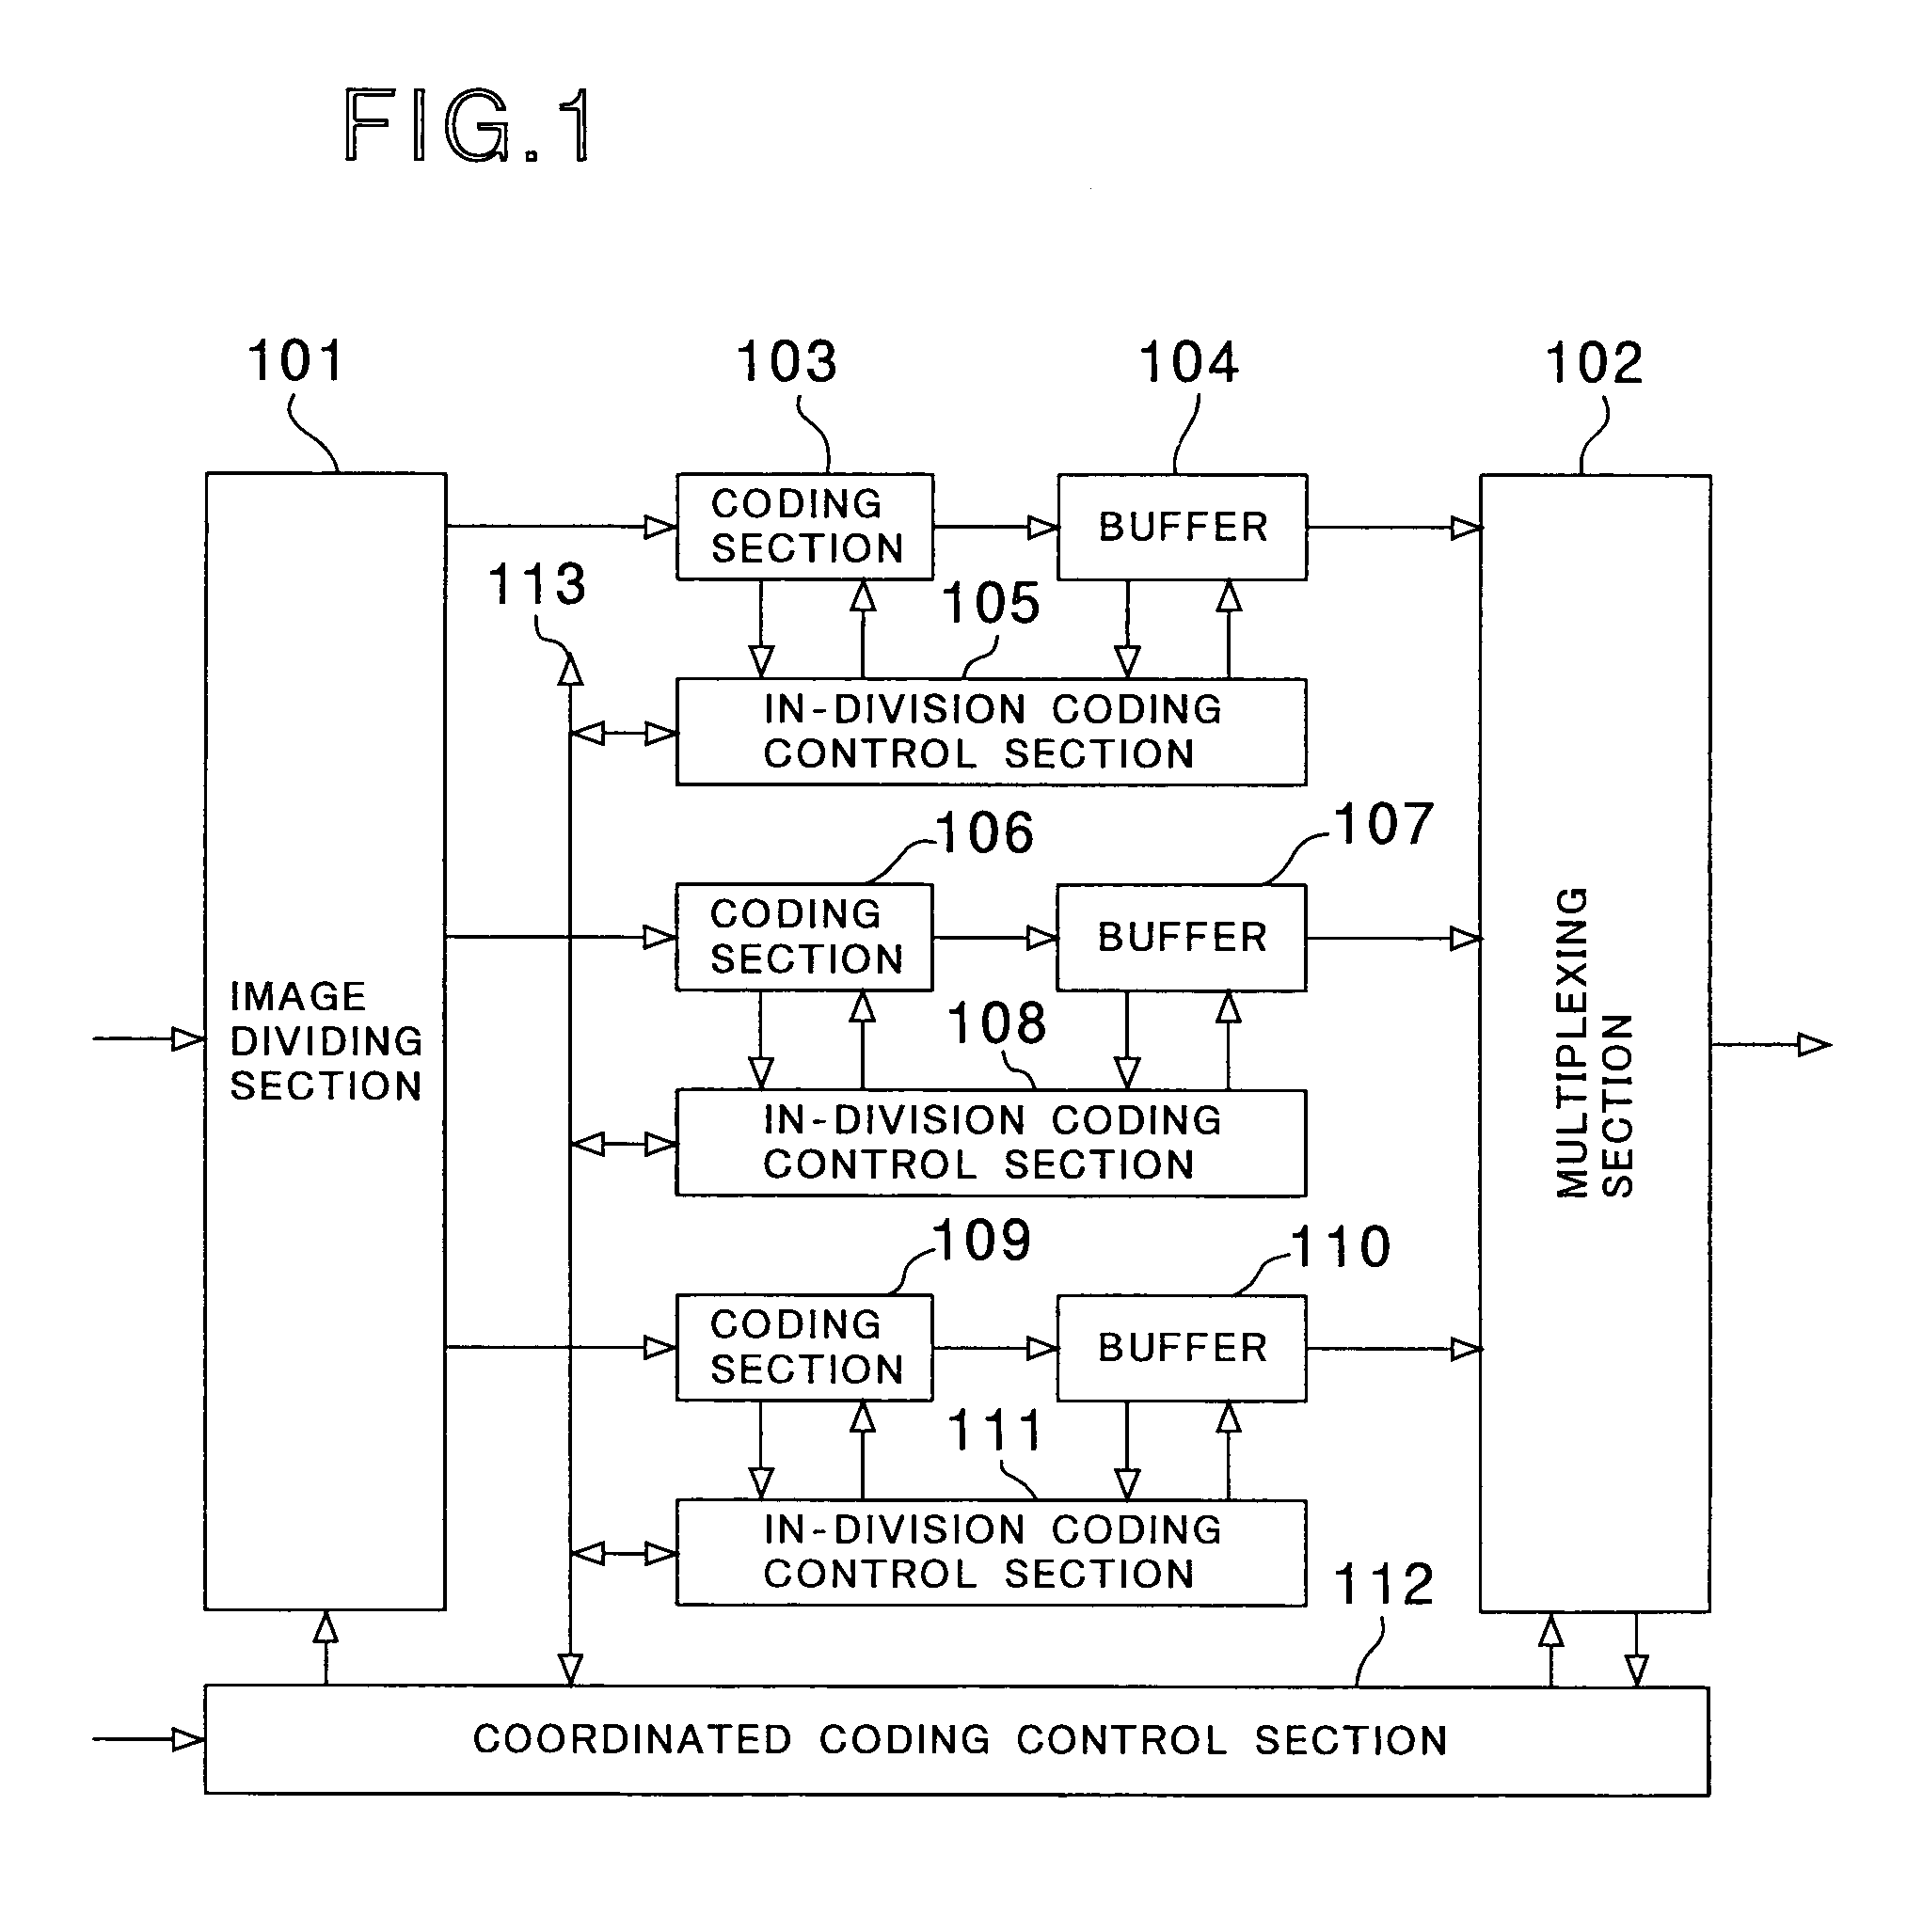 Video image coding apparatus with individual compression encoding sections for different image divisions